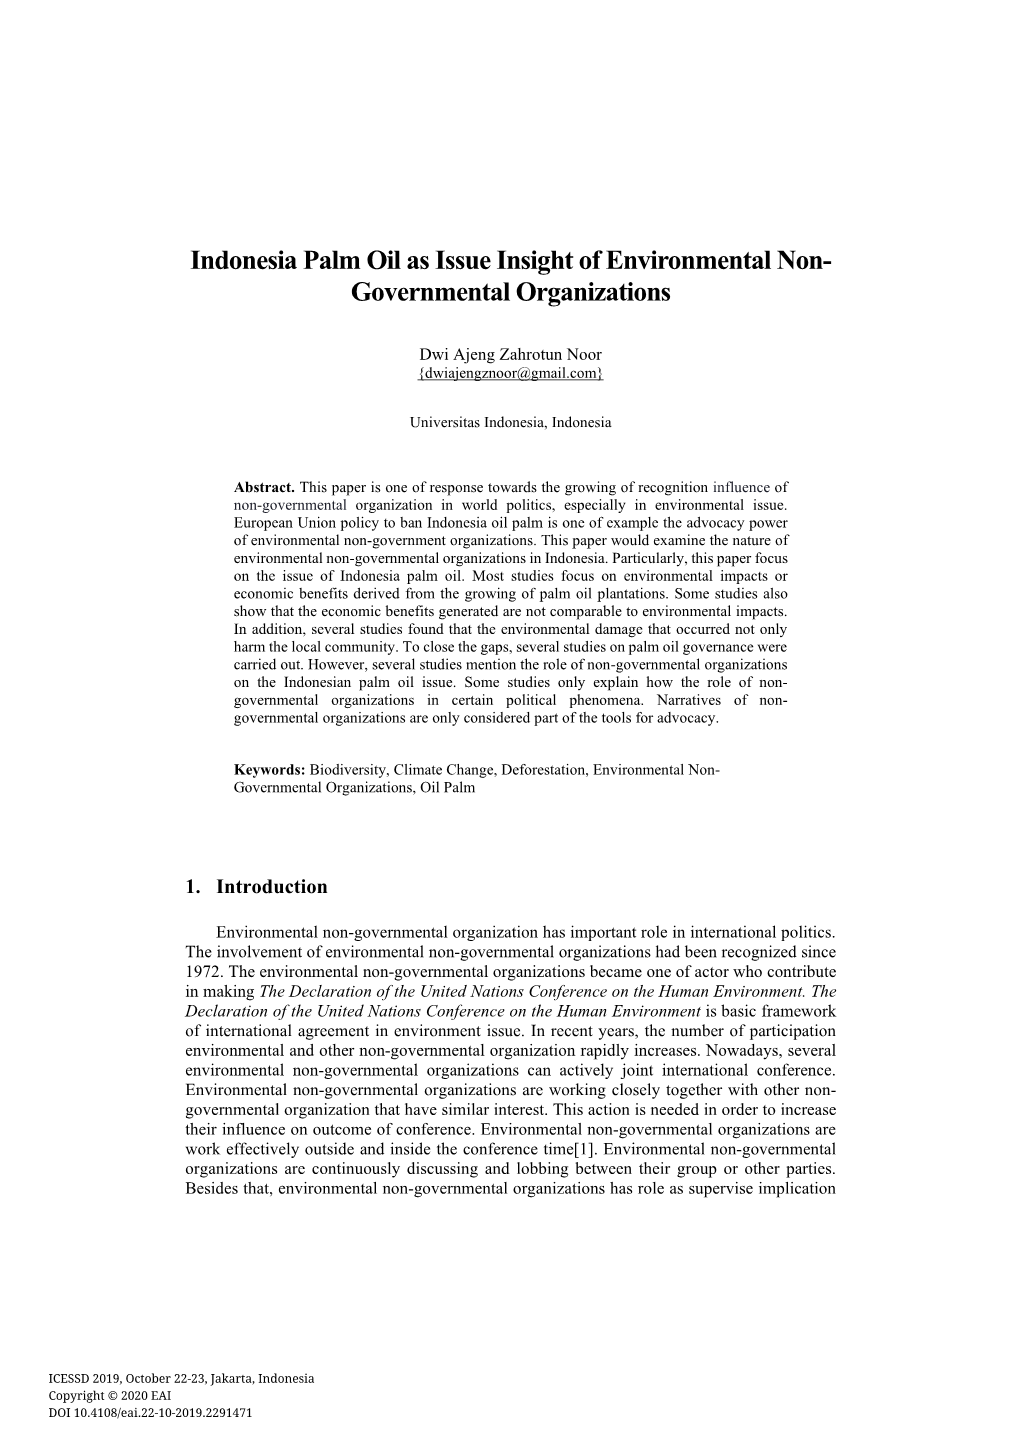 Indonesia Palm Oil As Issue Insight of Environmental Non- Governmental Organizations